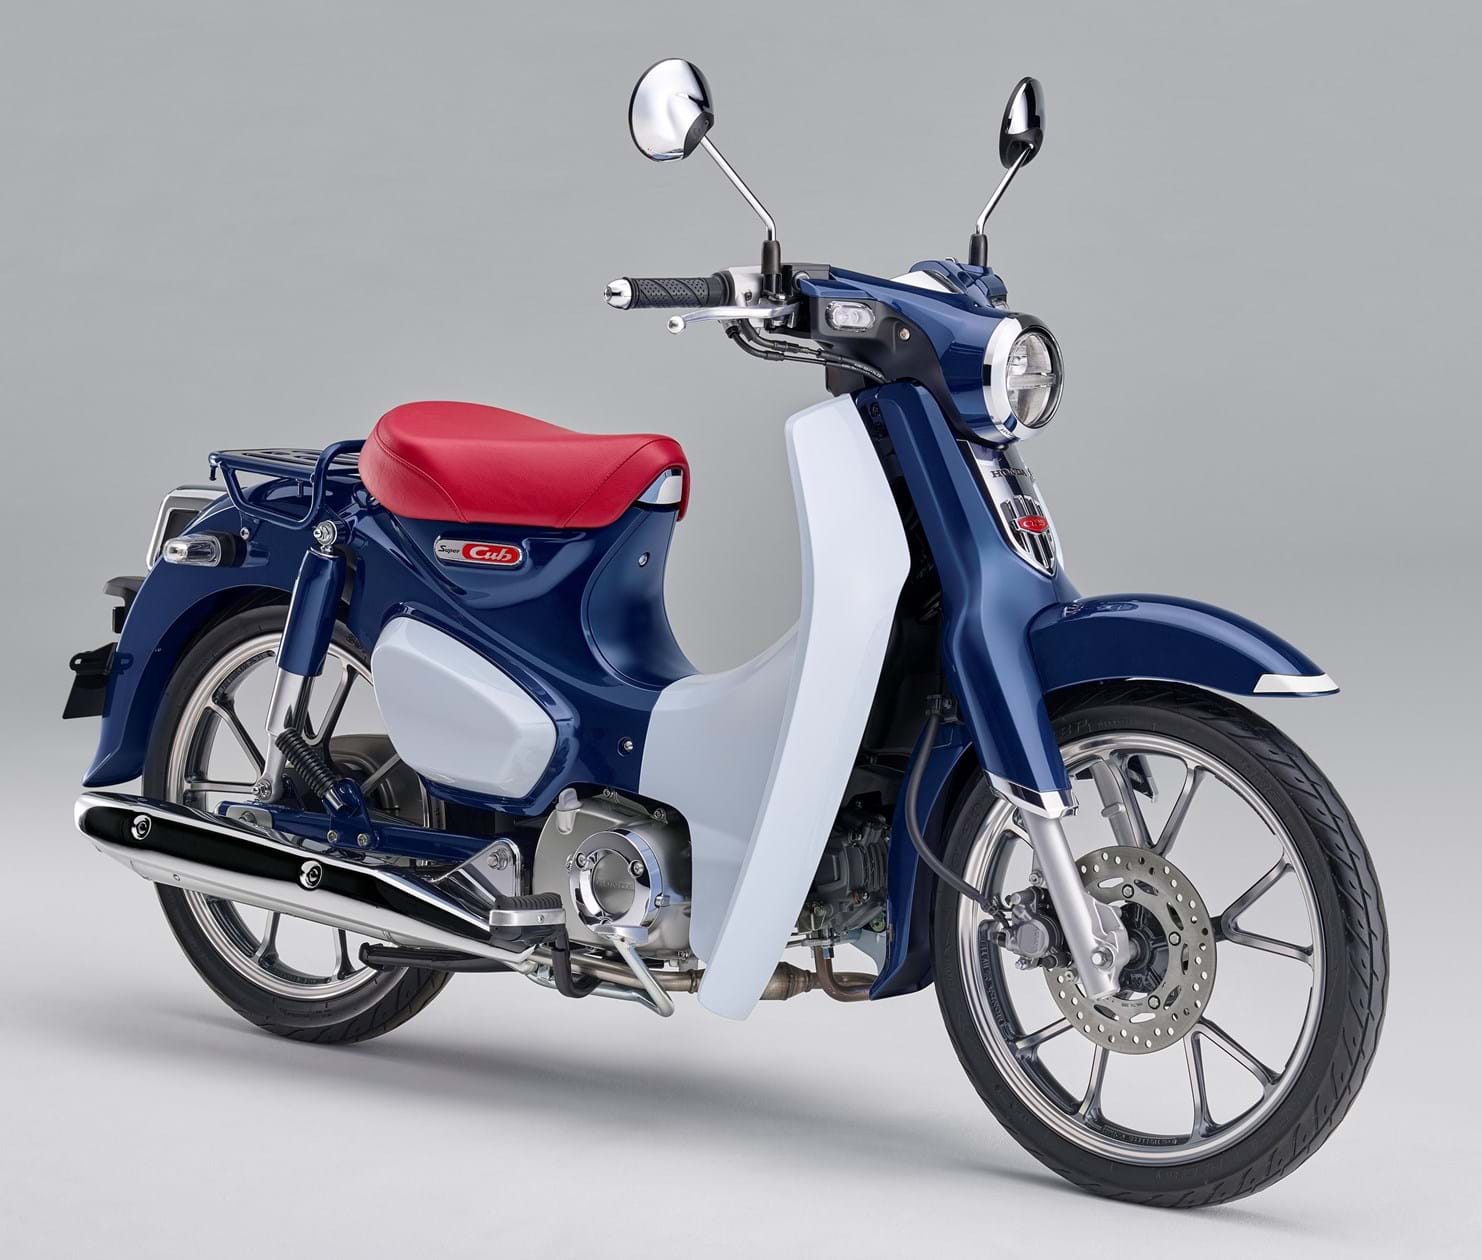 Honda 49cc Scooter Price In Pakistan All Motorcycle